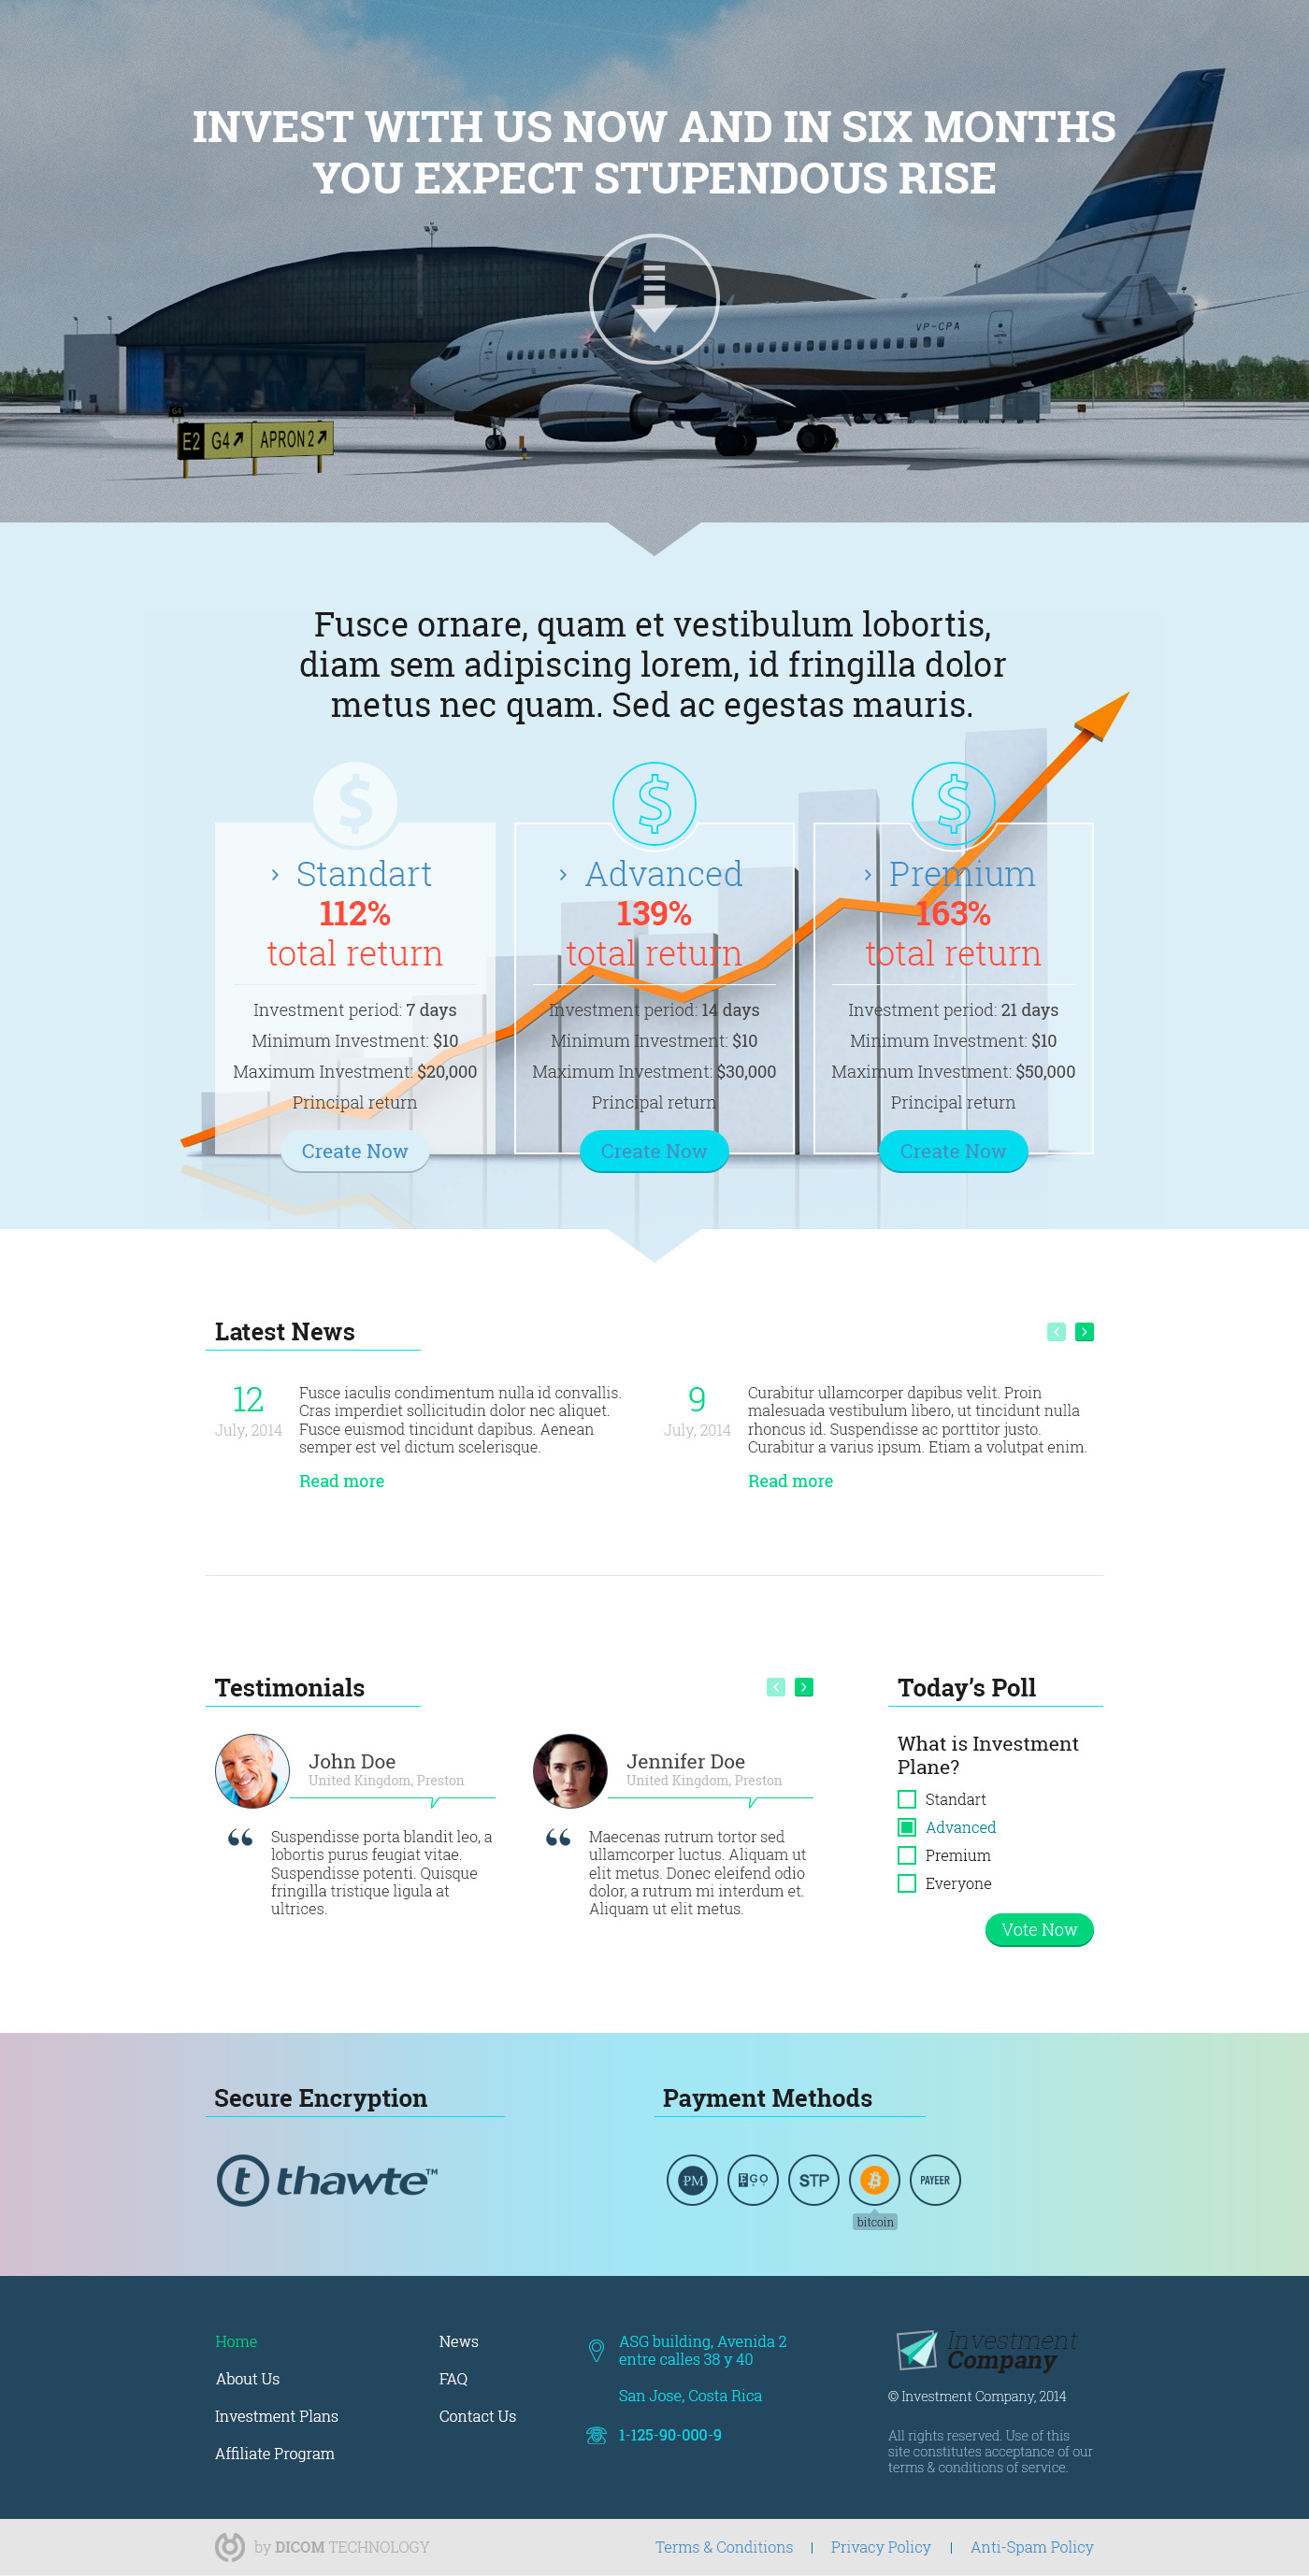 invest Investment free psd download landing page UI ux dicom technology free psd